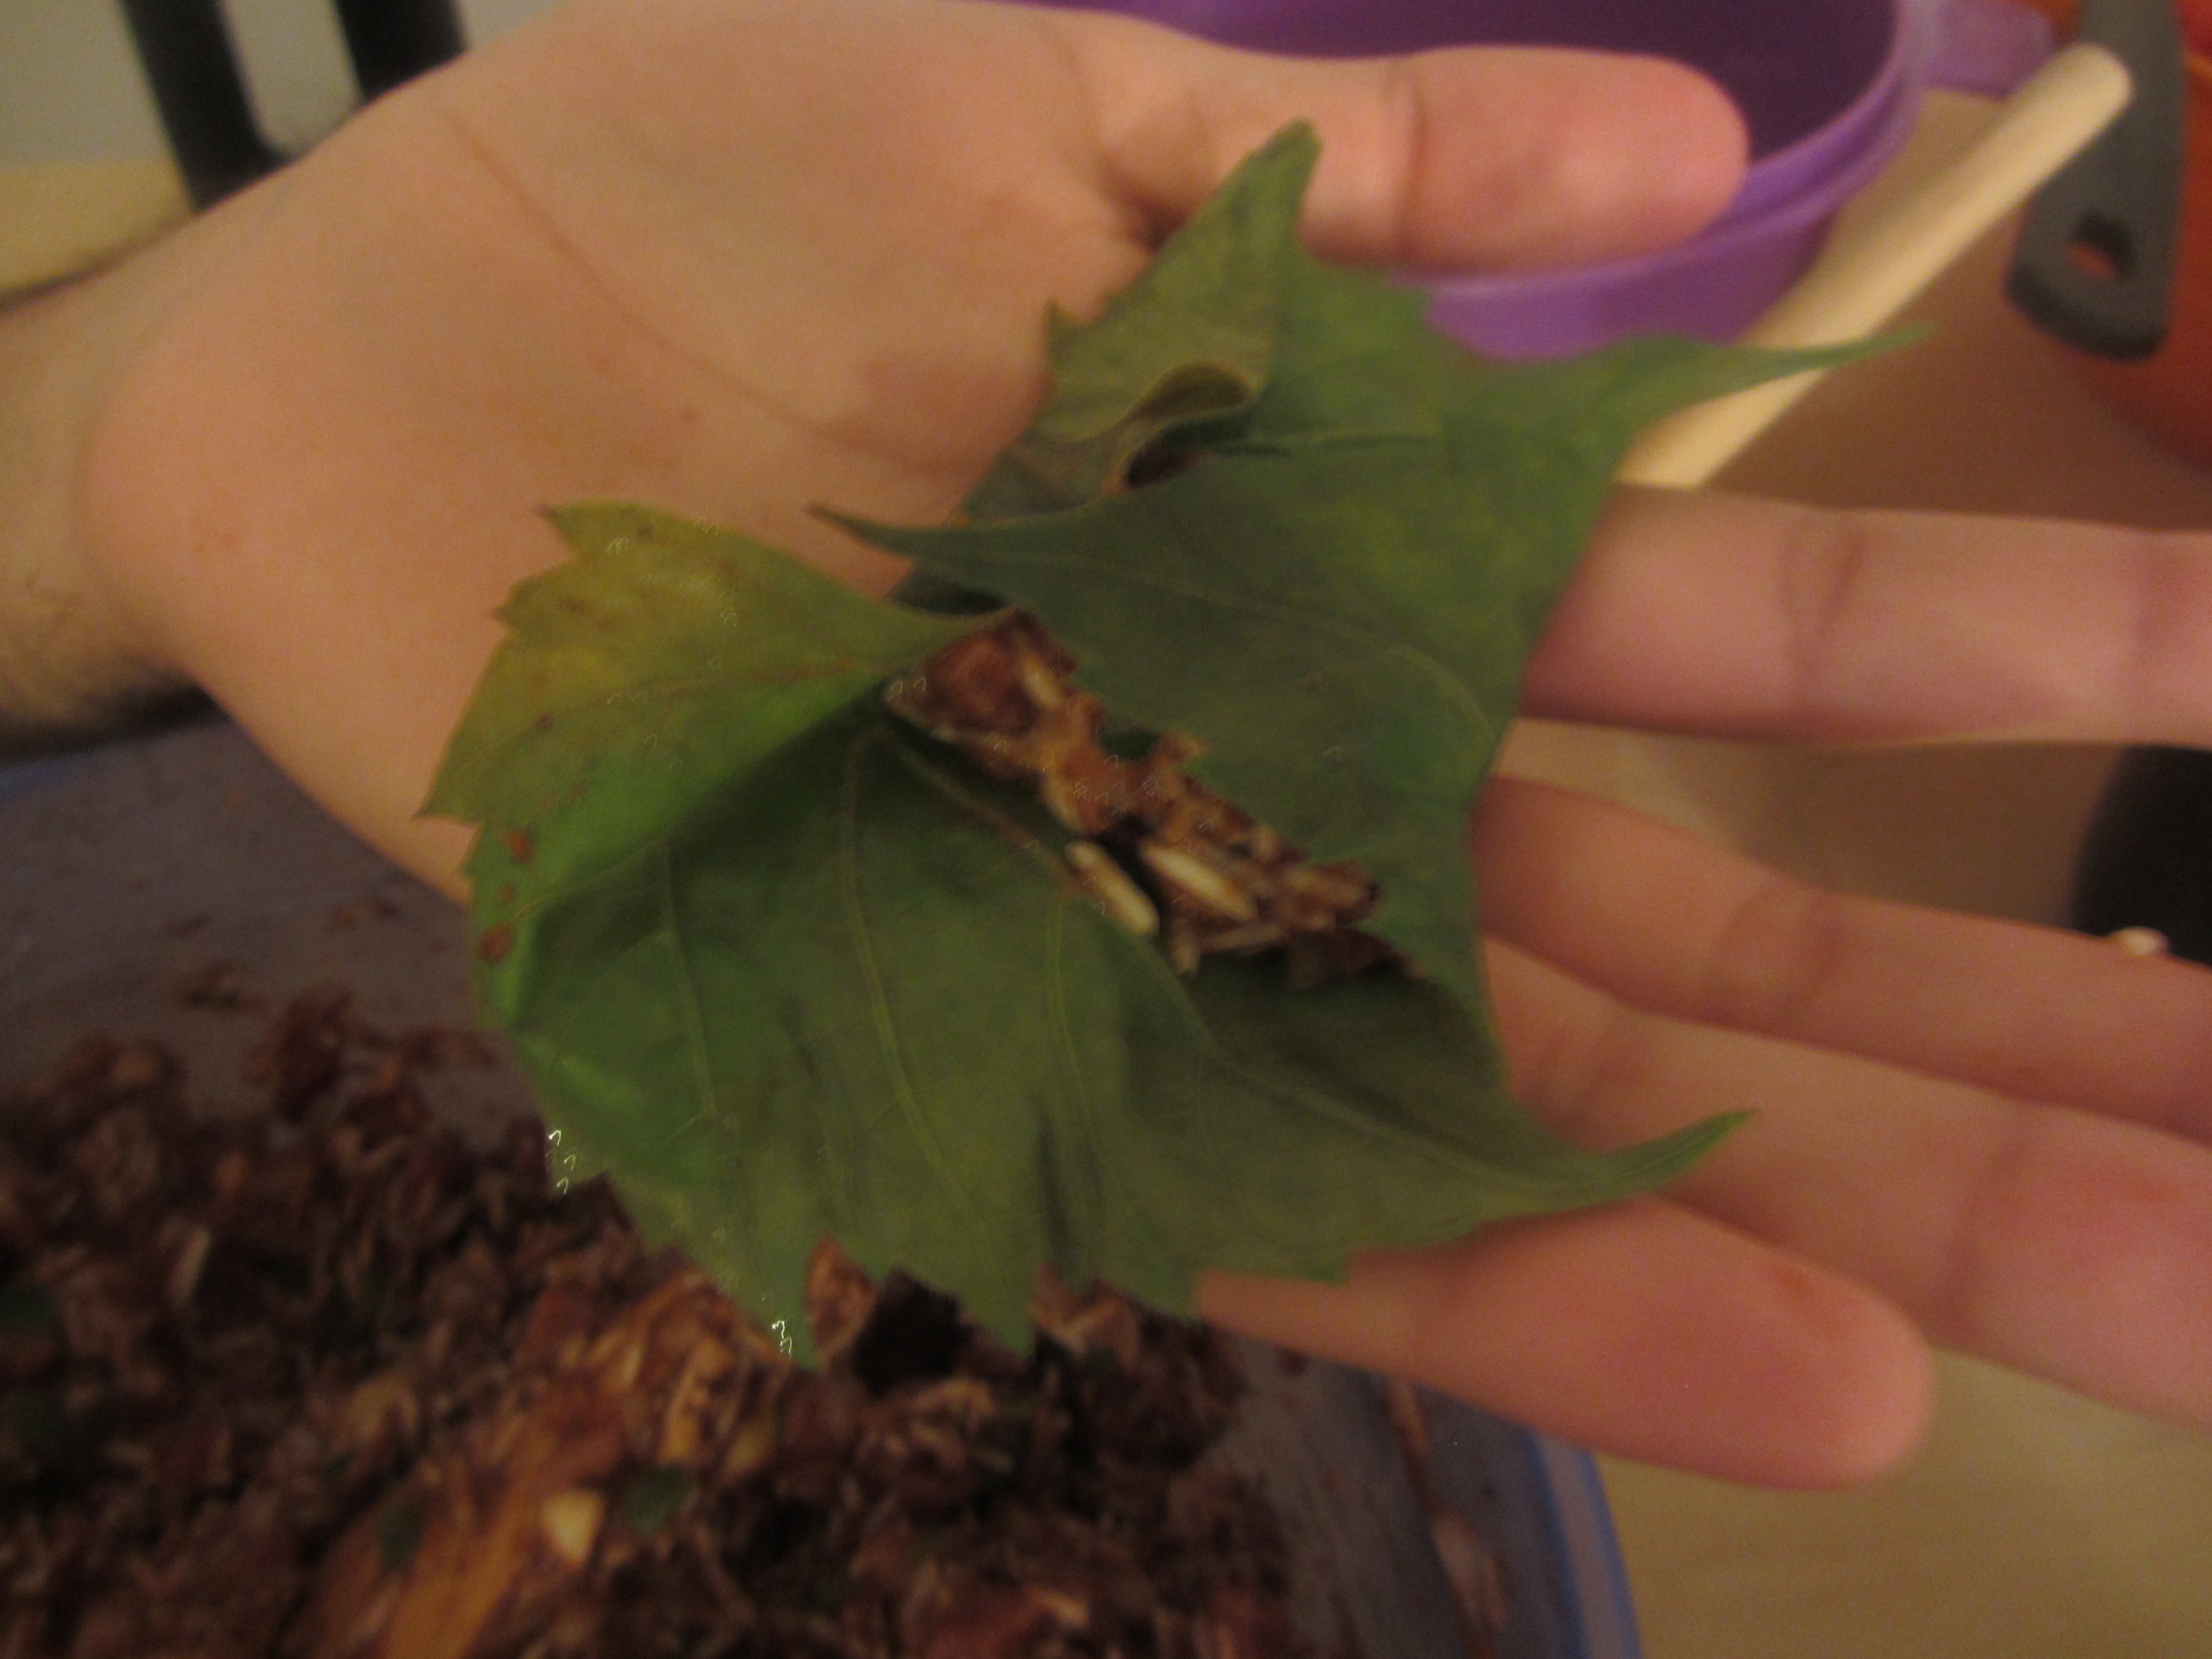 Grape leaf being stuffed on the palm of a hand